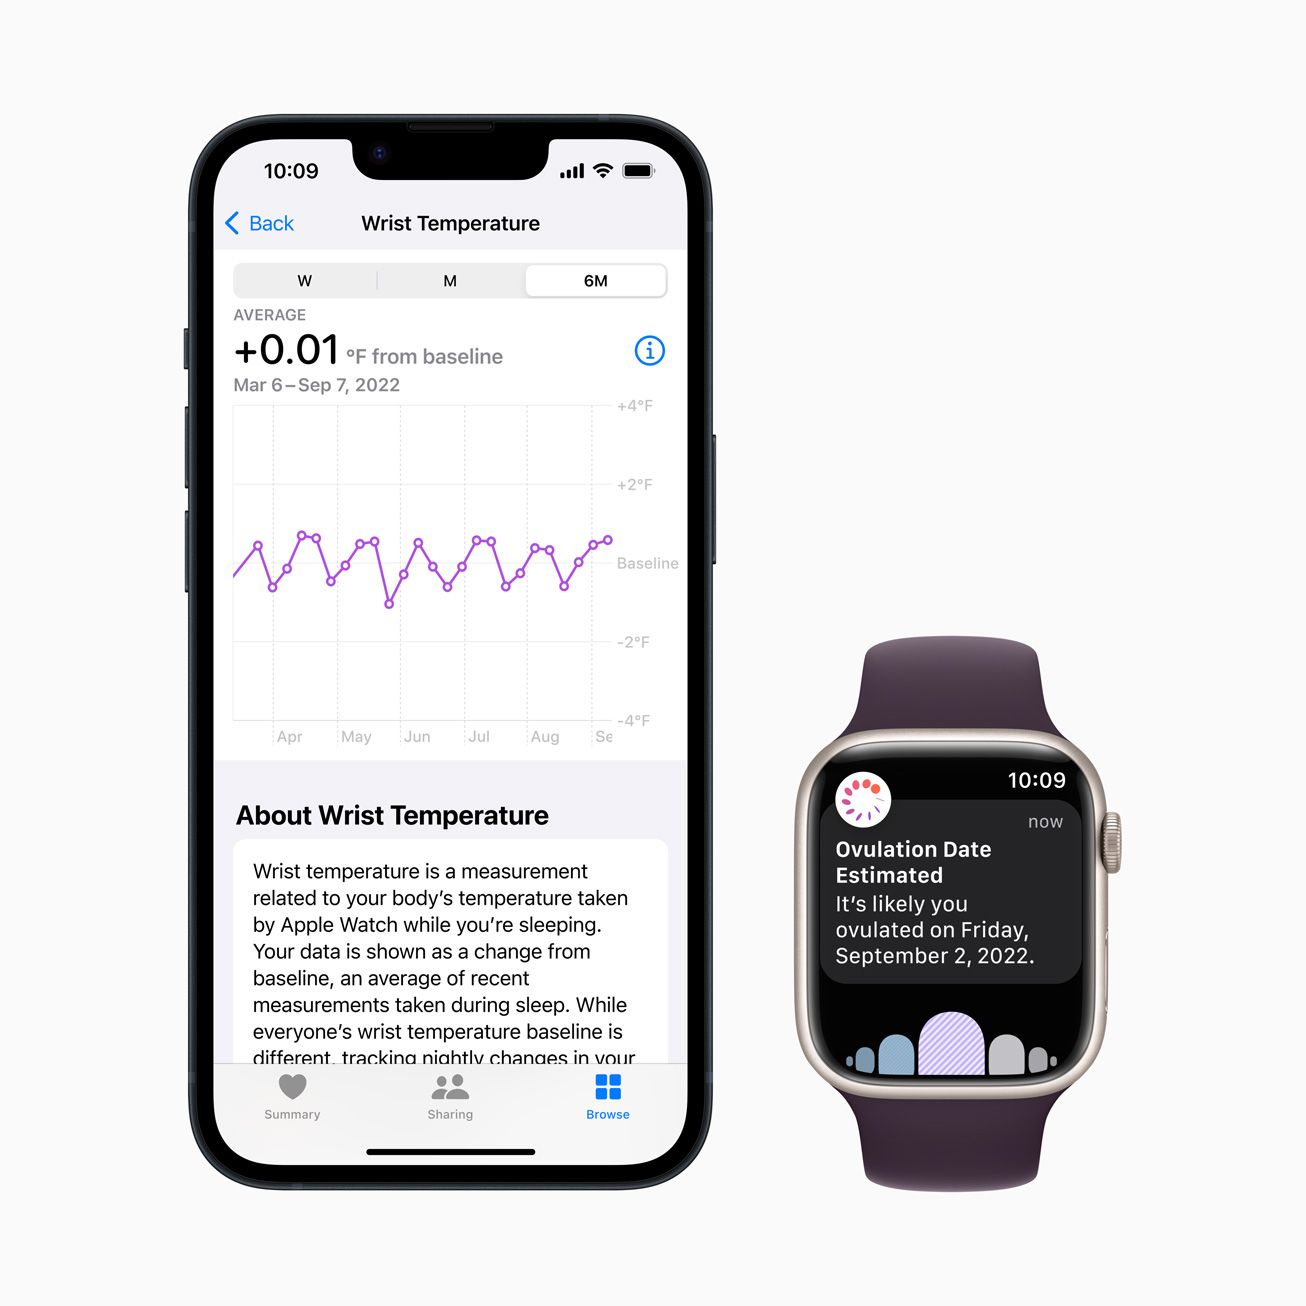 Apple Watch Series 8 Review: Ovulation, Sleep Tracking, New Features